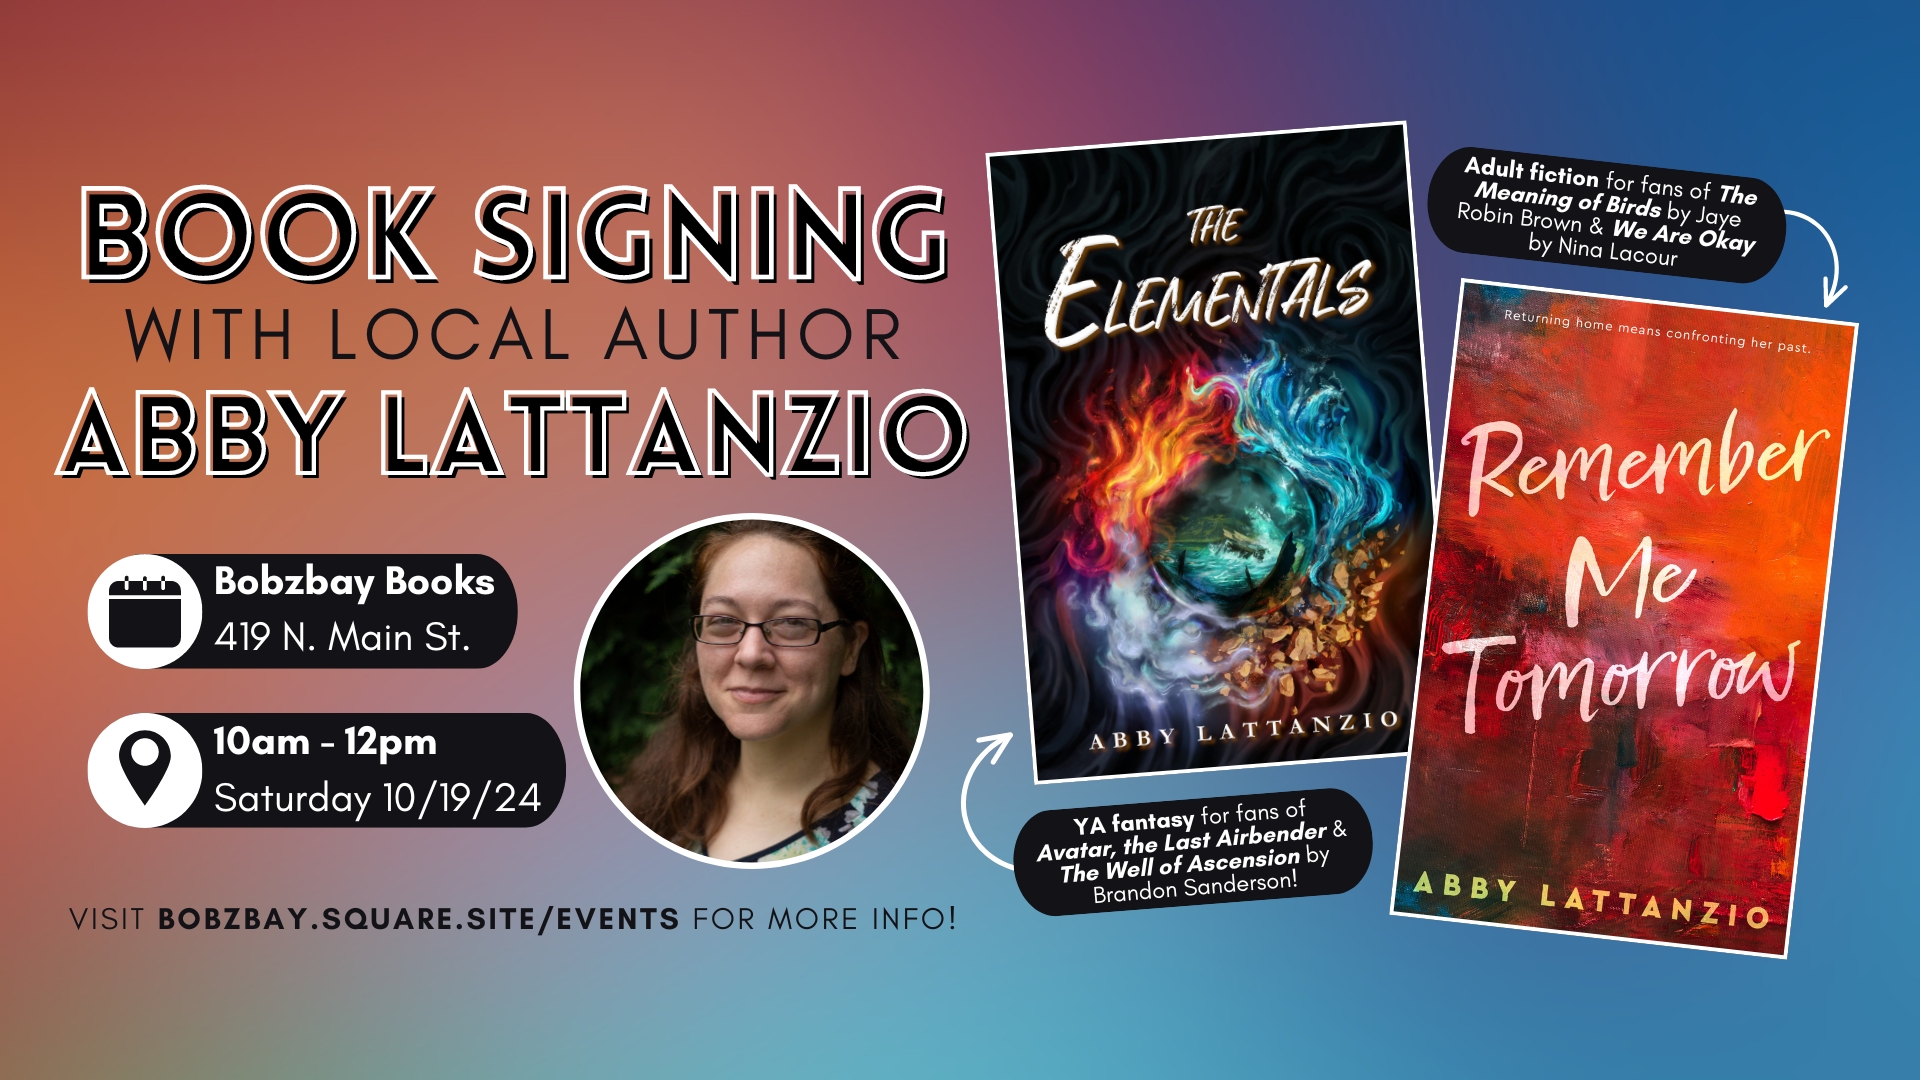 Book Signing with Local Author Abby Lattanzio at Bobzbay Books